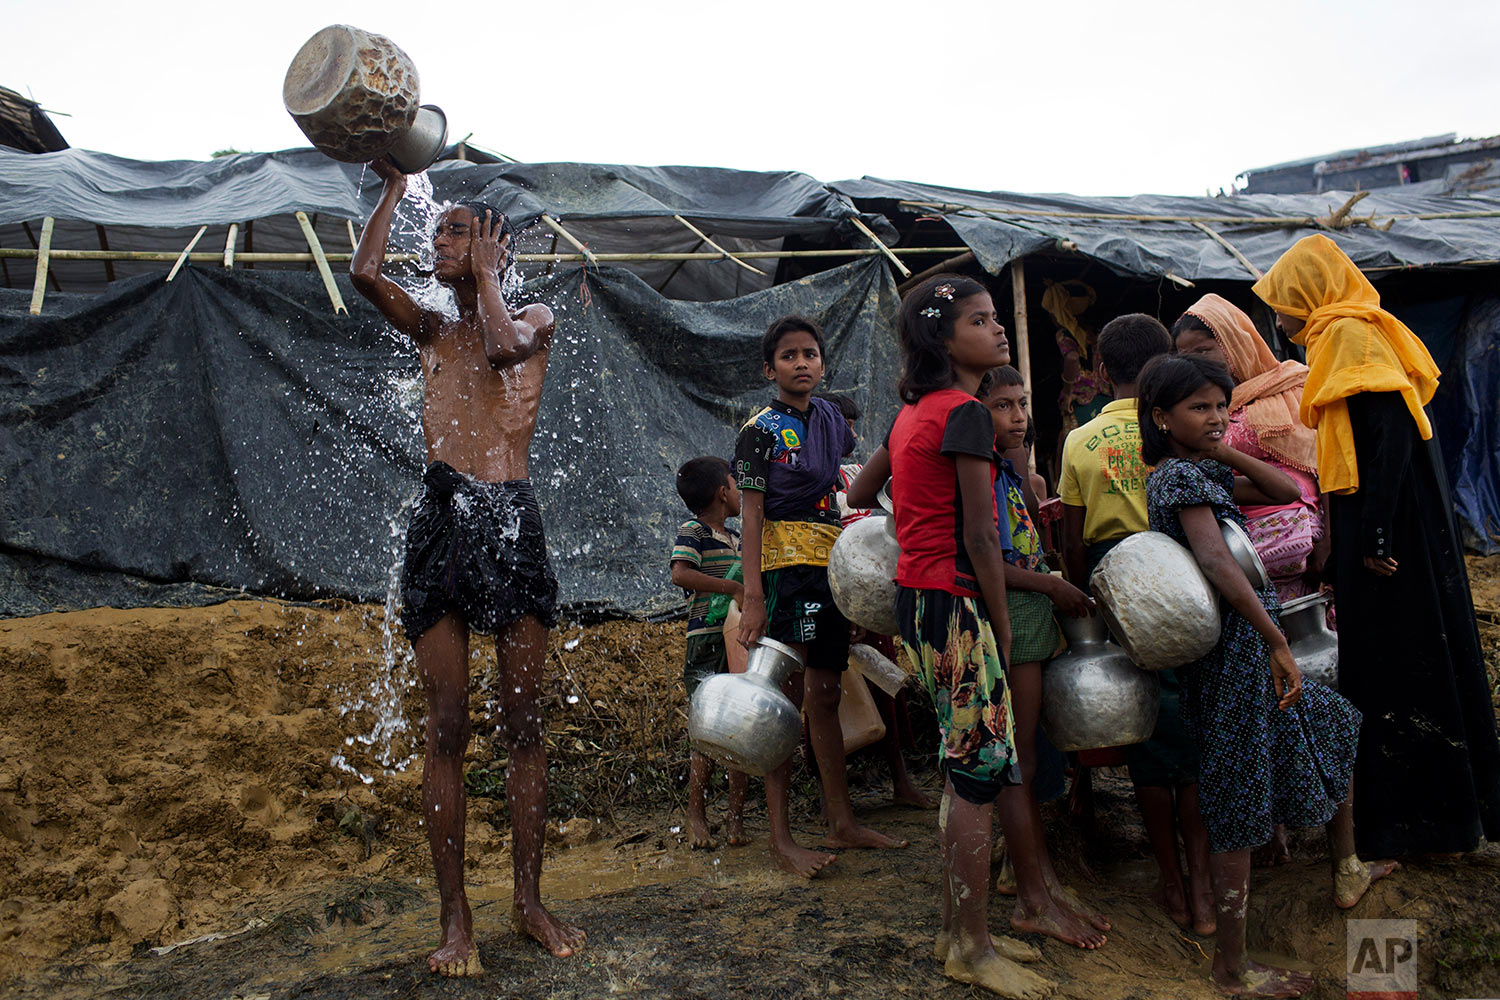 Newly arrived Rohingya wait to collect water from a tube well that was installed a few days ago, as a boy bathes beside them, at Ukhia, Bangladesh, Saturday, Sept. 9, 2017. (AP Photo/Bernat Armangue)